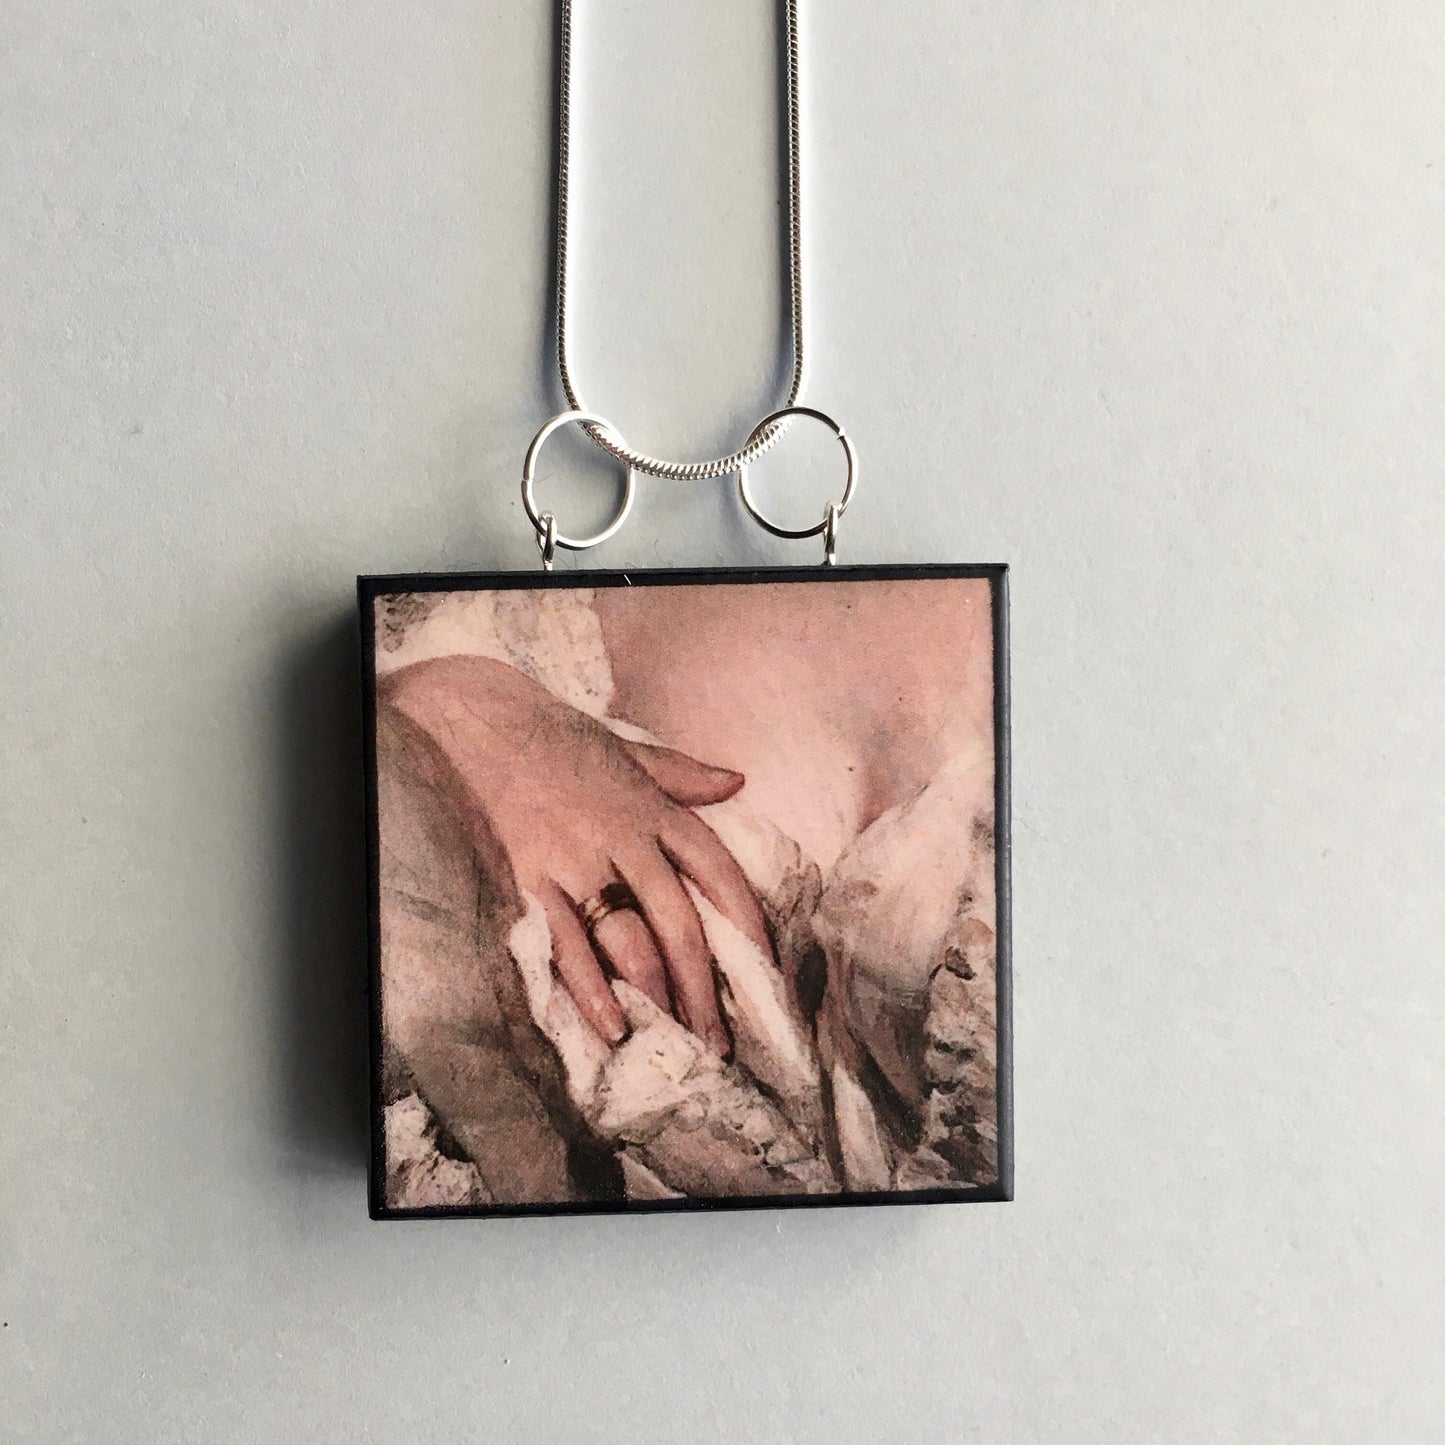 obljewellery Statement necklace 925 silver chain with wooden squared pendant inspired by  a sensual art detail of a hand take from a Neo Rococo painting “Portrait of a Lady” by German artist Franz Xaver Winterhalter.  